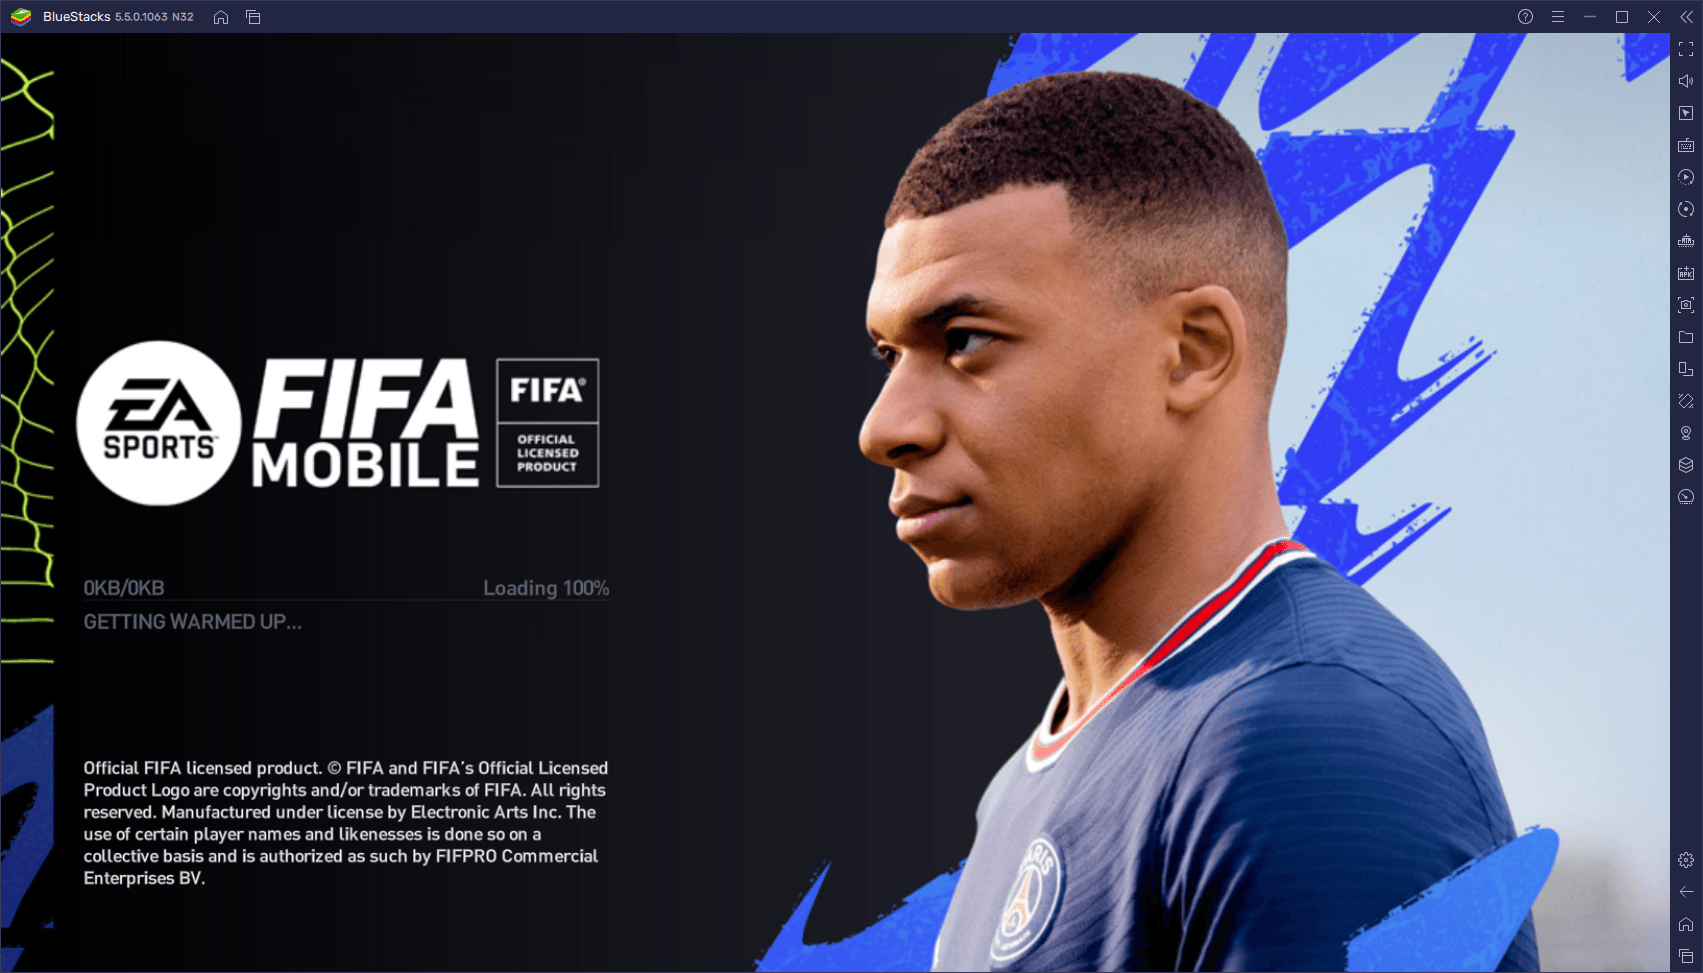 Beginner’s Guide for FIFA Soccer - All the Basic Info You Need to Know To Get a Good Start